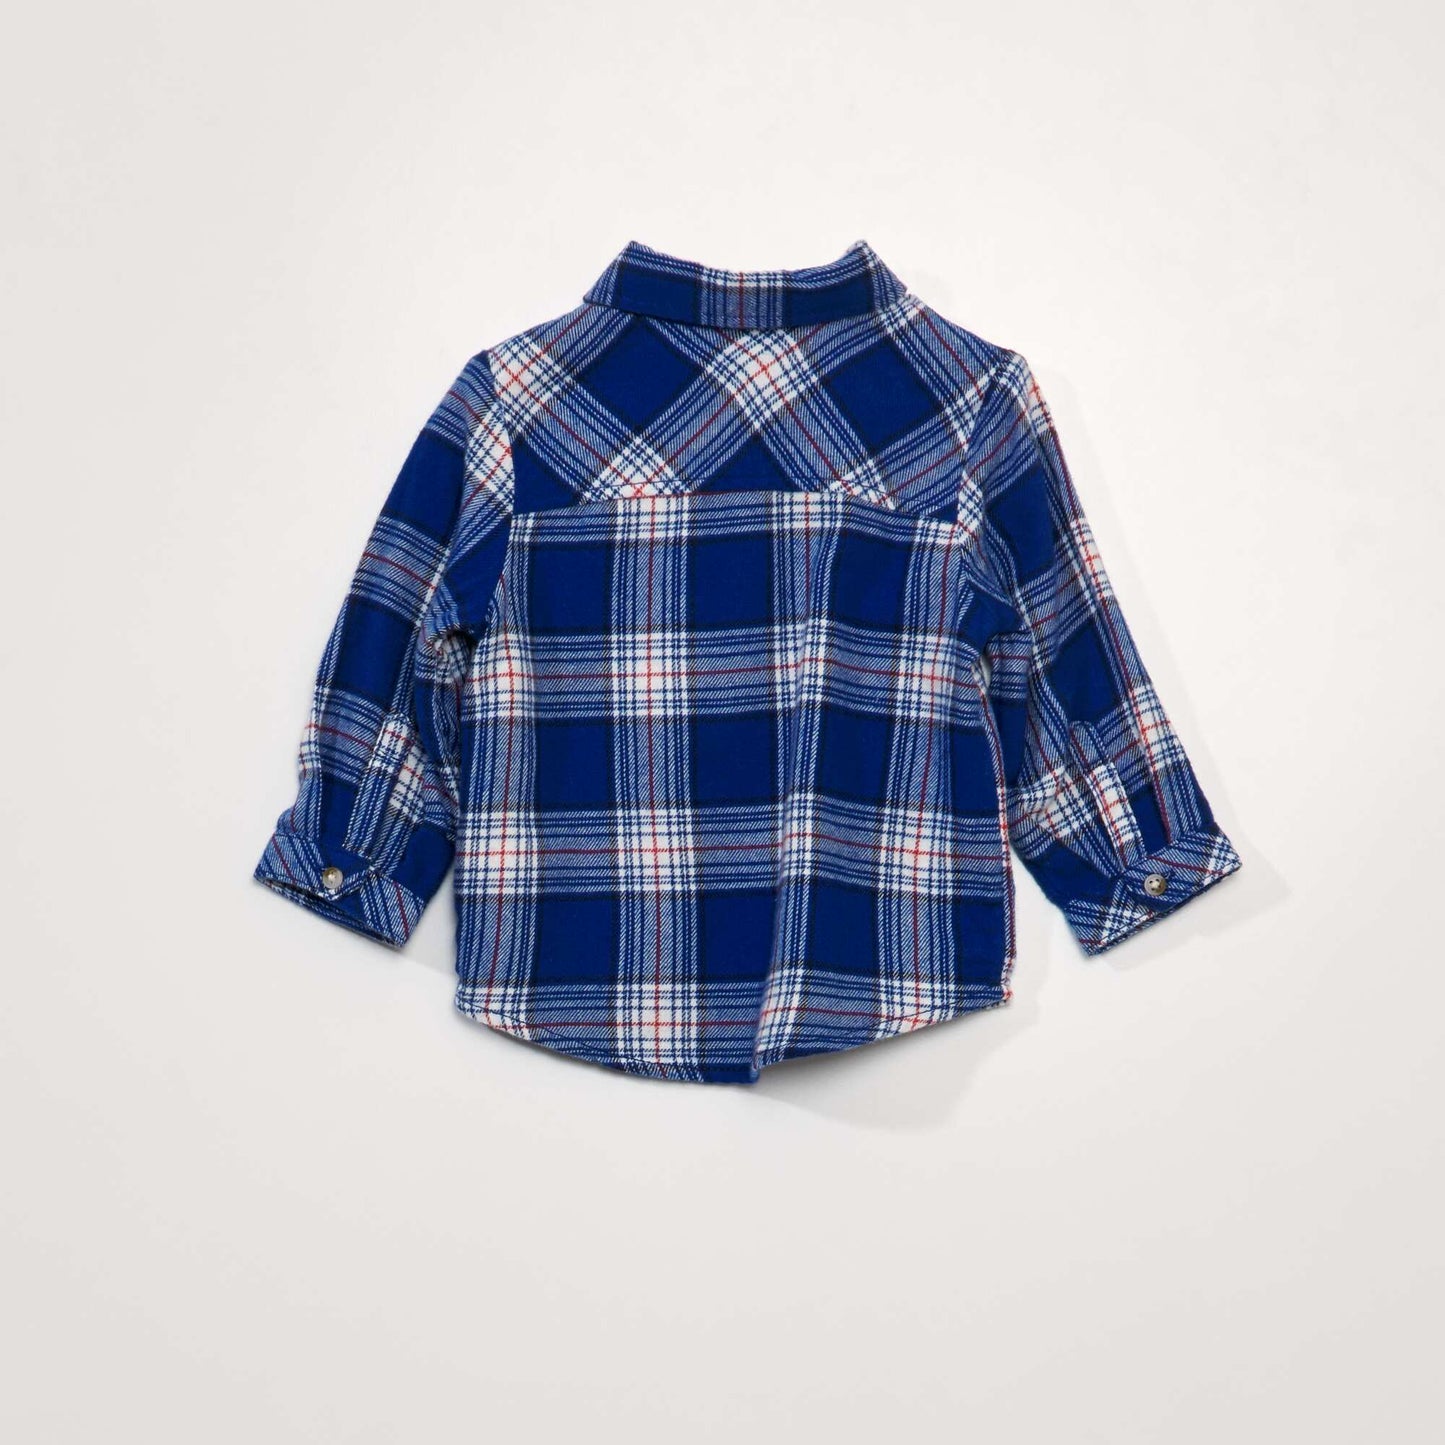 Checked flannel shirt BLUE